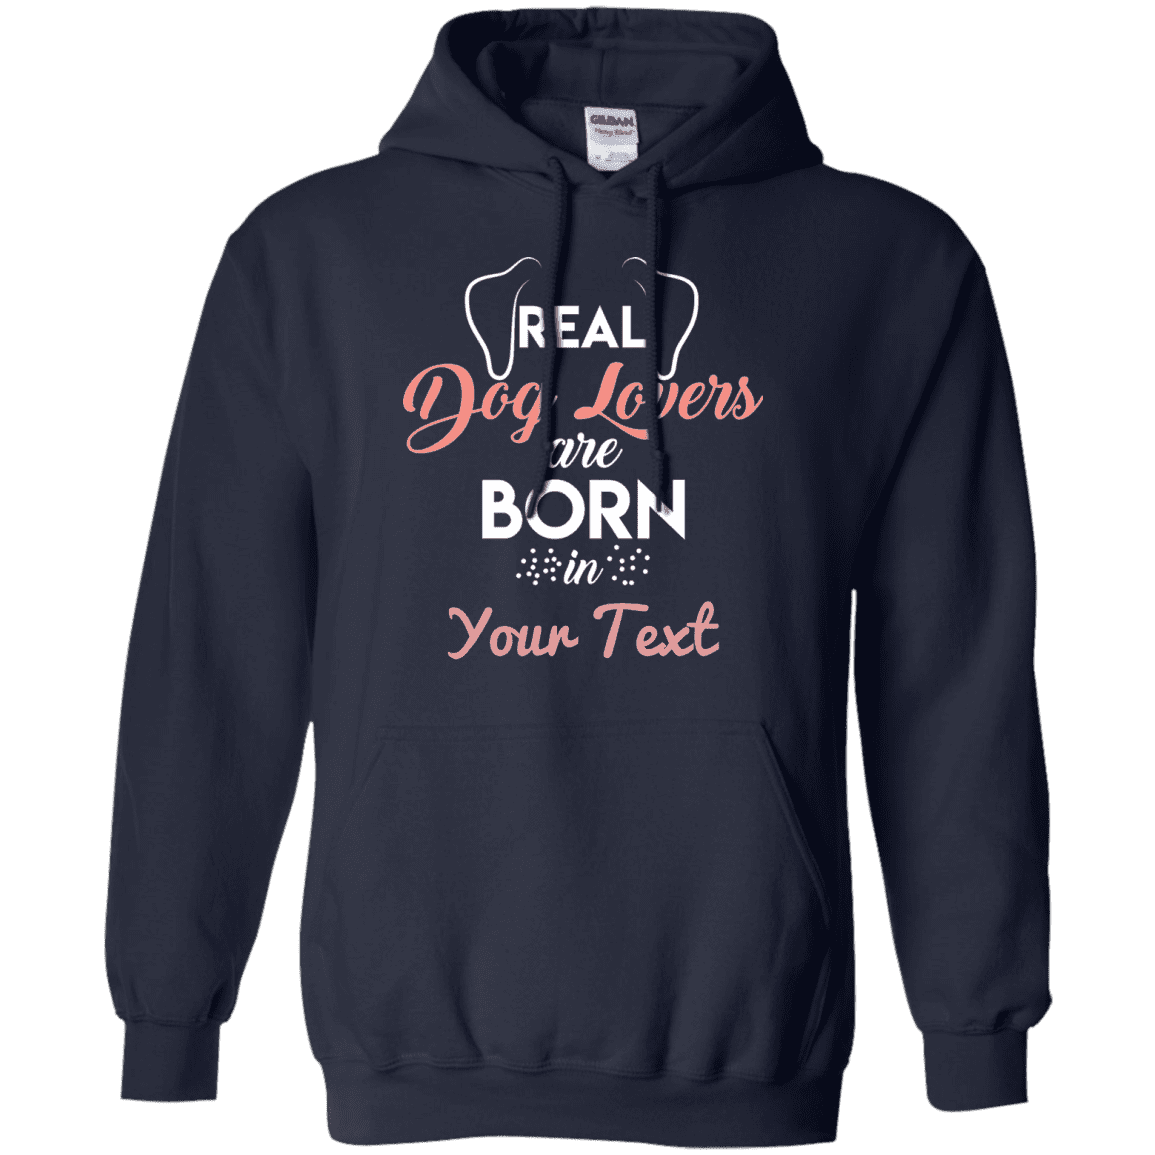 Personalized Real Dog Lovers - Hoodie.